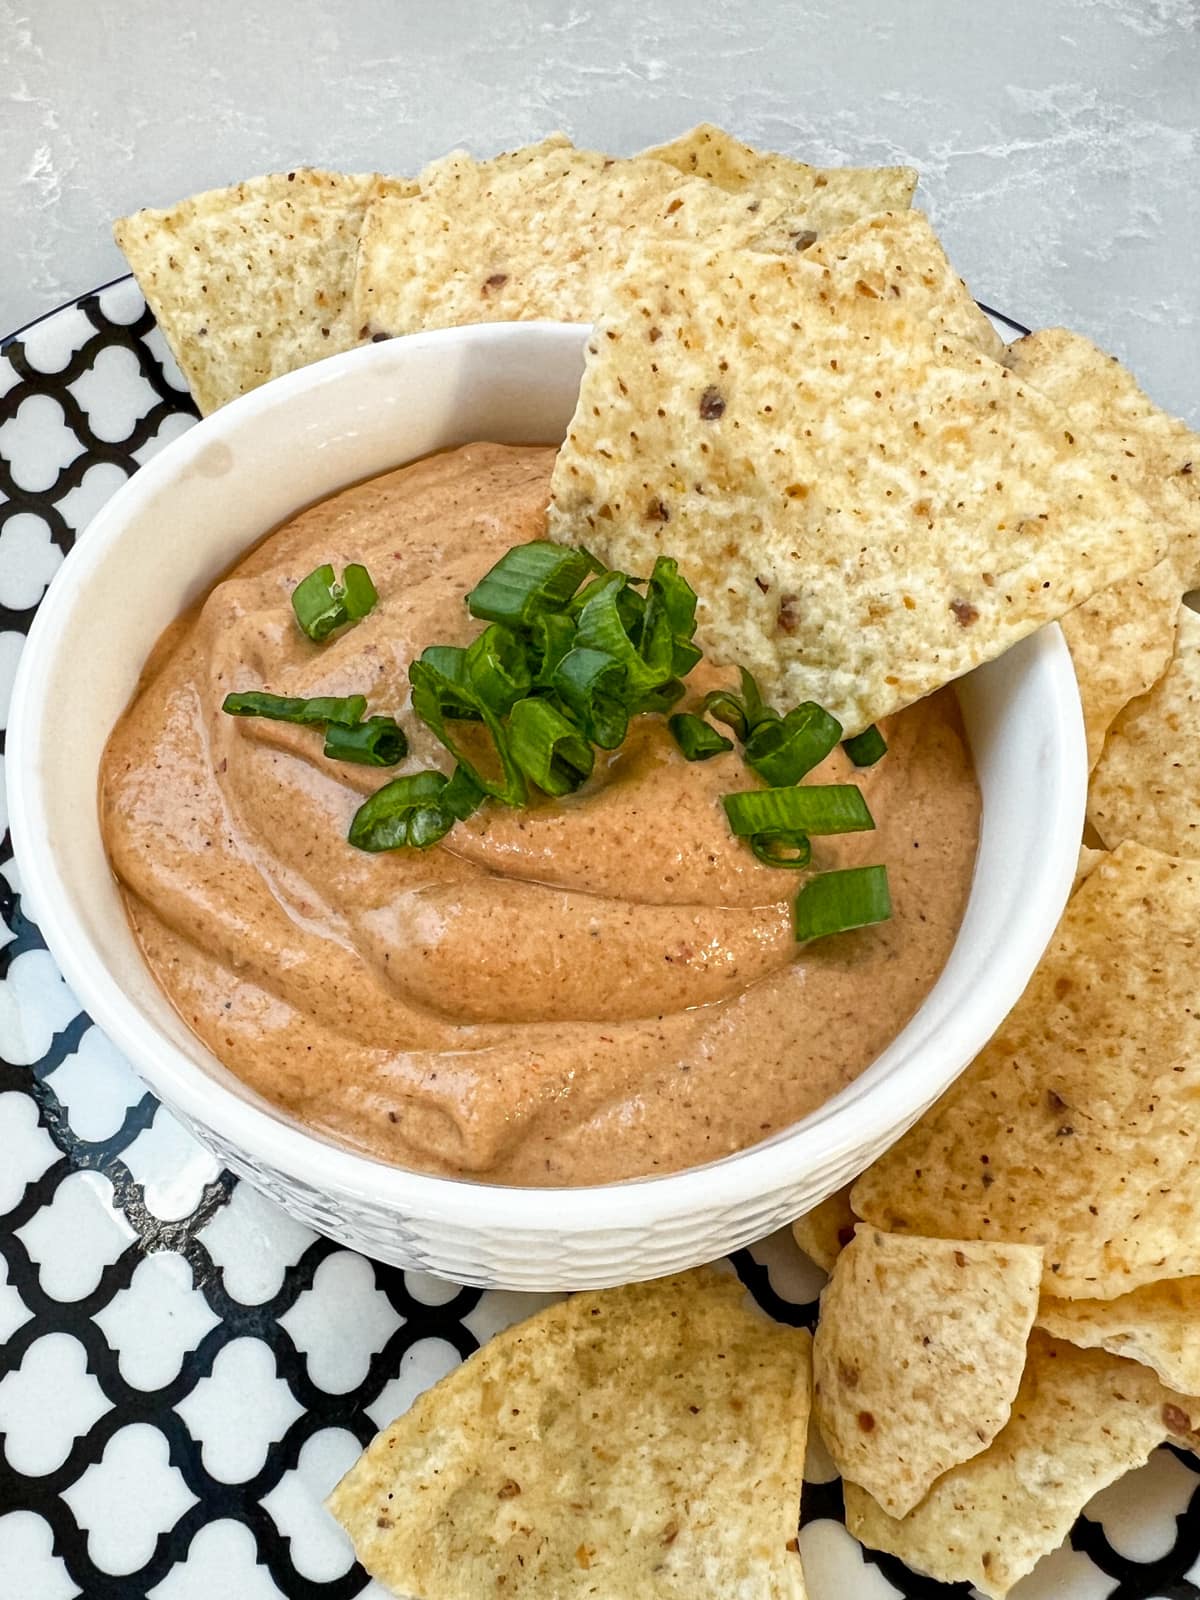 Bowlful of dairy free queso sauce.